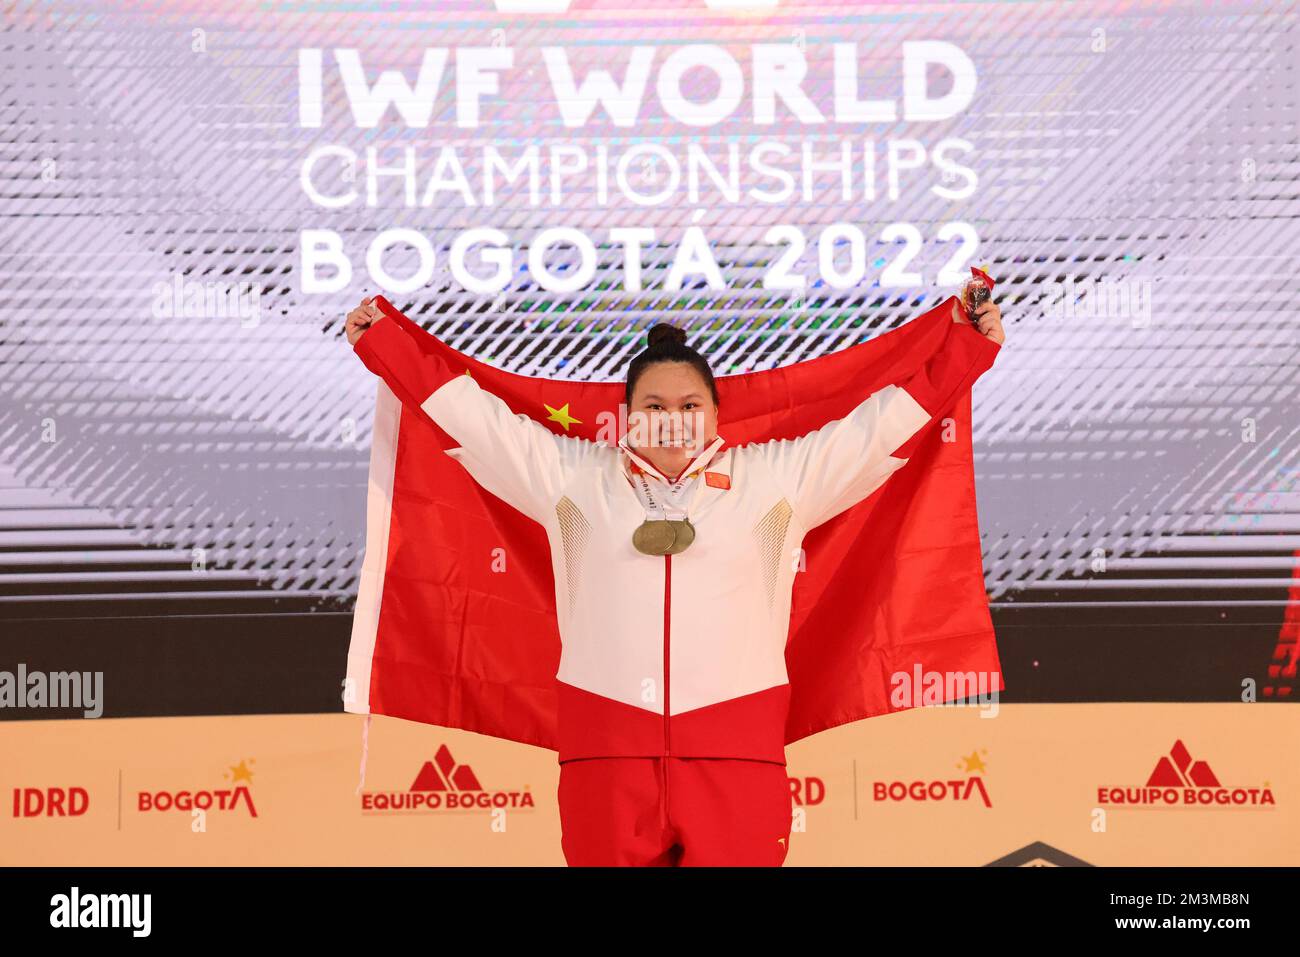 Bogota, Colombia. 15th Dec, 2022. Li Wenwen of China poses during the awarding ceremony of the womens 87kg event at the 2022 World Weightlifting Championships in Bogota, Colombia, Dec